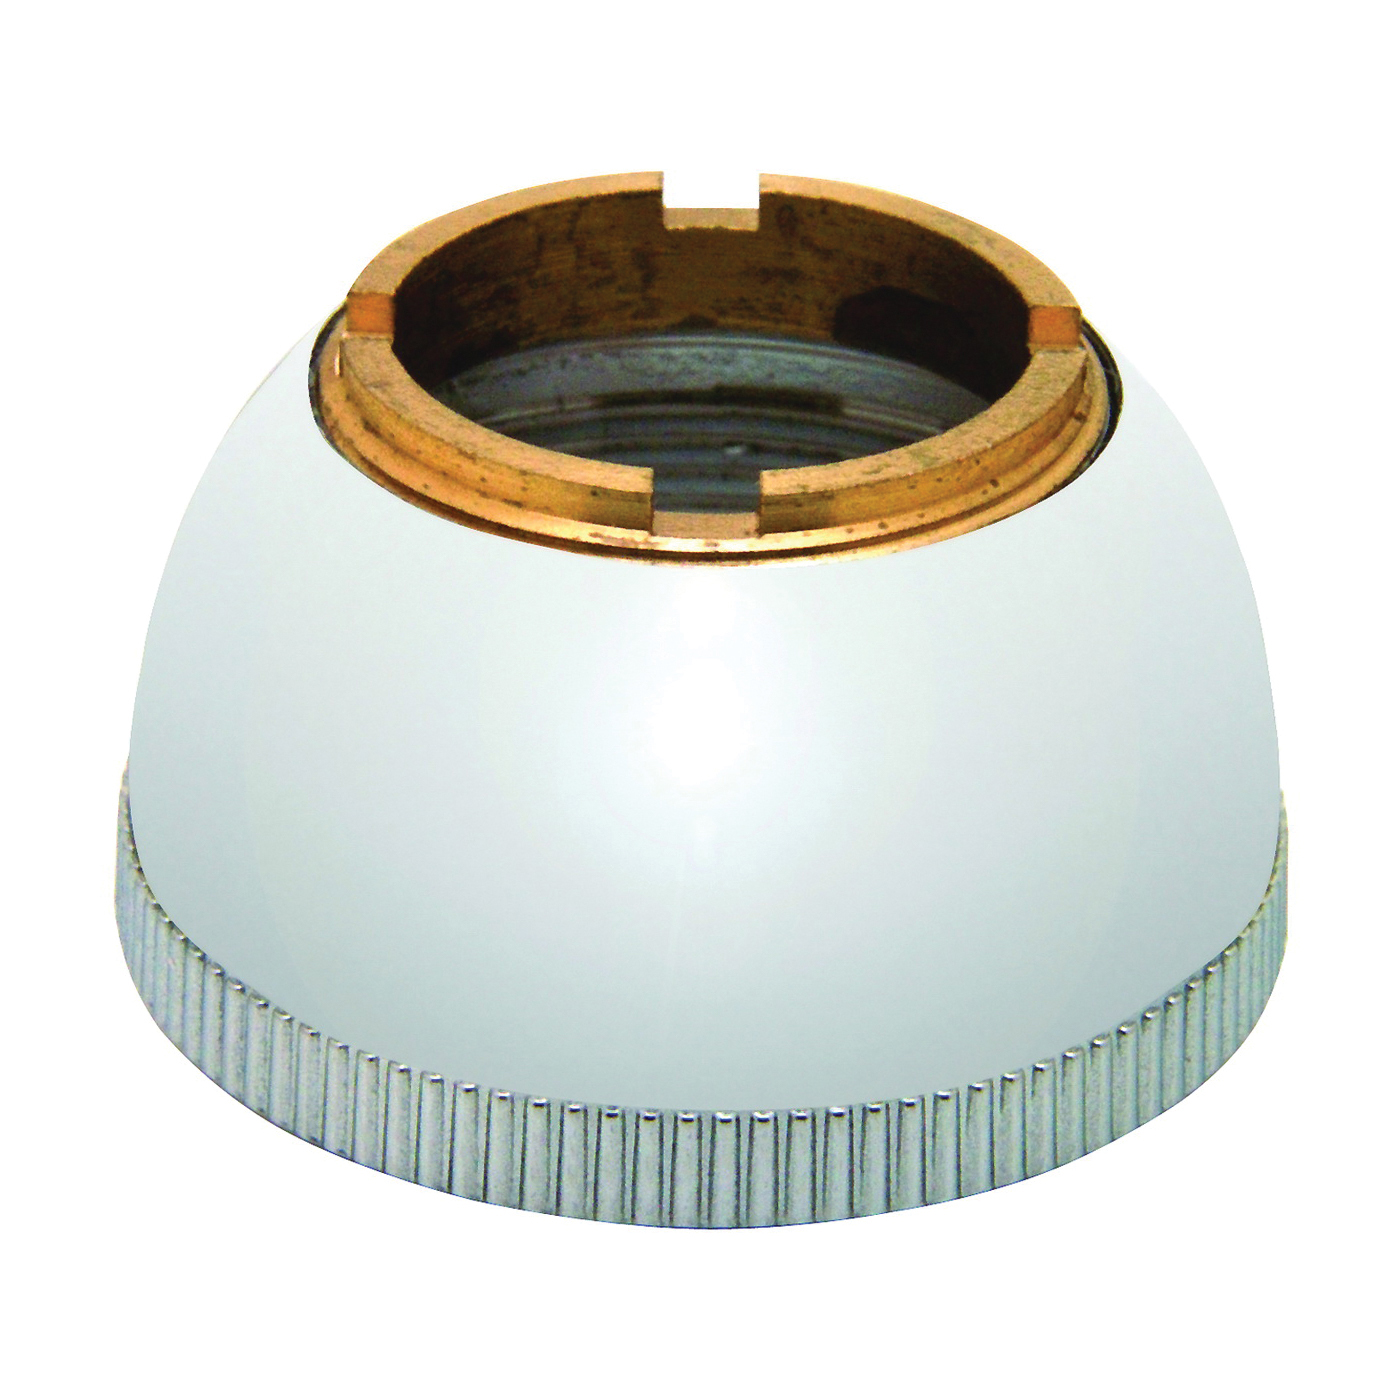 Danco 88756 Faucet Cap Assembly, 7/8 in ID, 1-3/4 in OD, Brass, Chrome Plated - 1